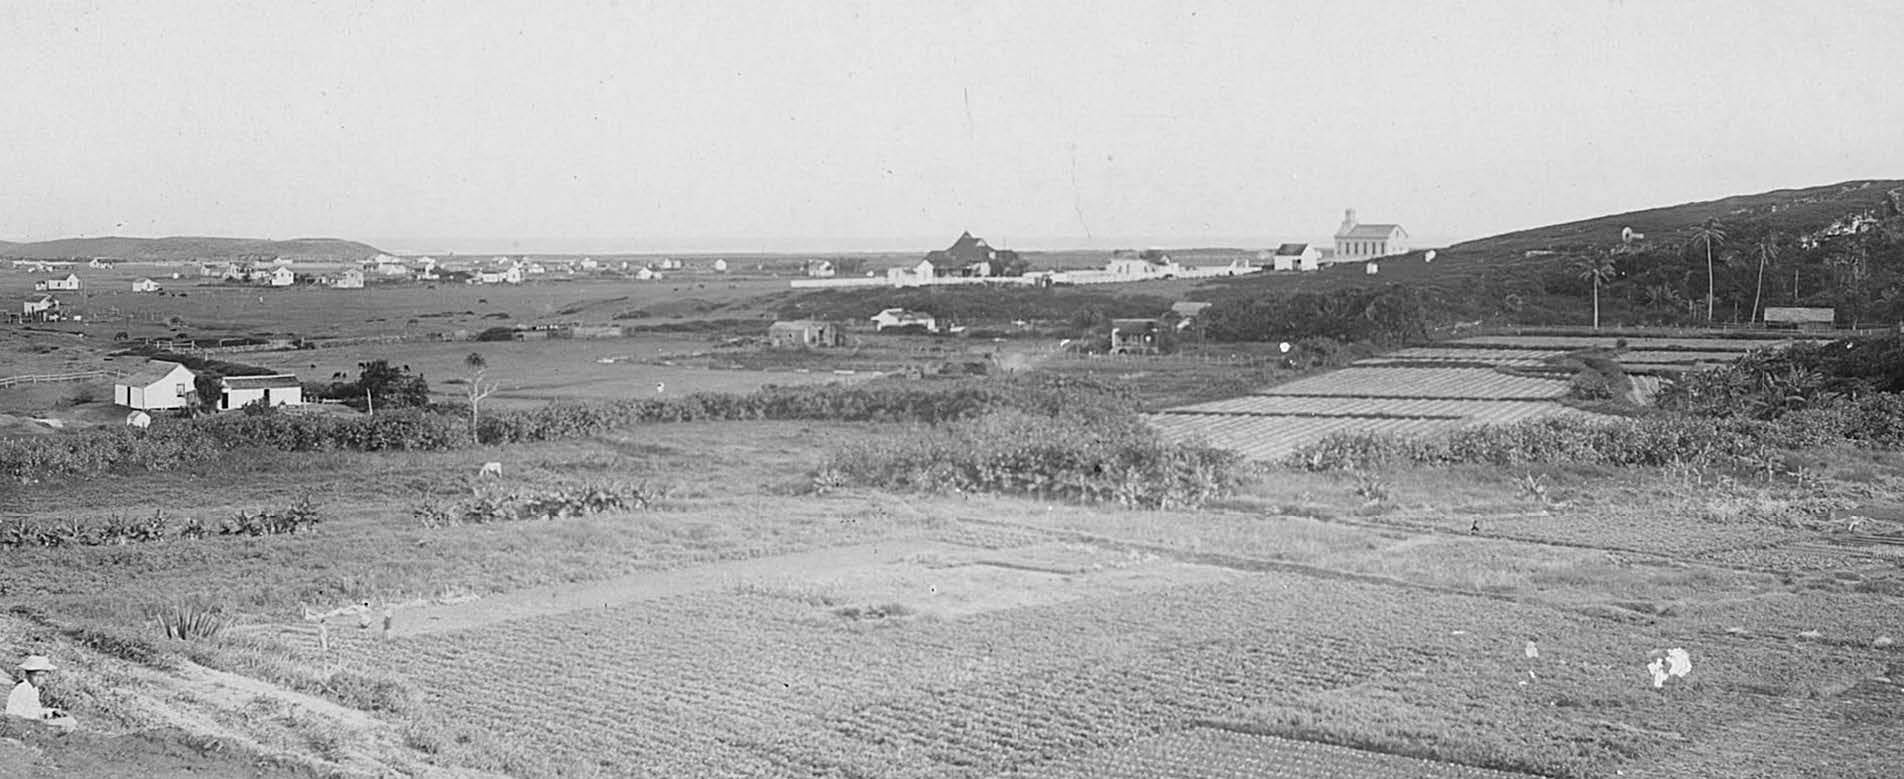 Village of Lāʻie circa 1898. The large building at center is the mission home, and the larger building to its right is the Lāʻie Chapel, named “I Hemolele.” The chapel's location would later become the site of the Laie Hawaii Temple. Courtesy of Church History Library.